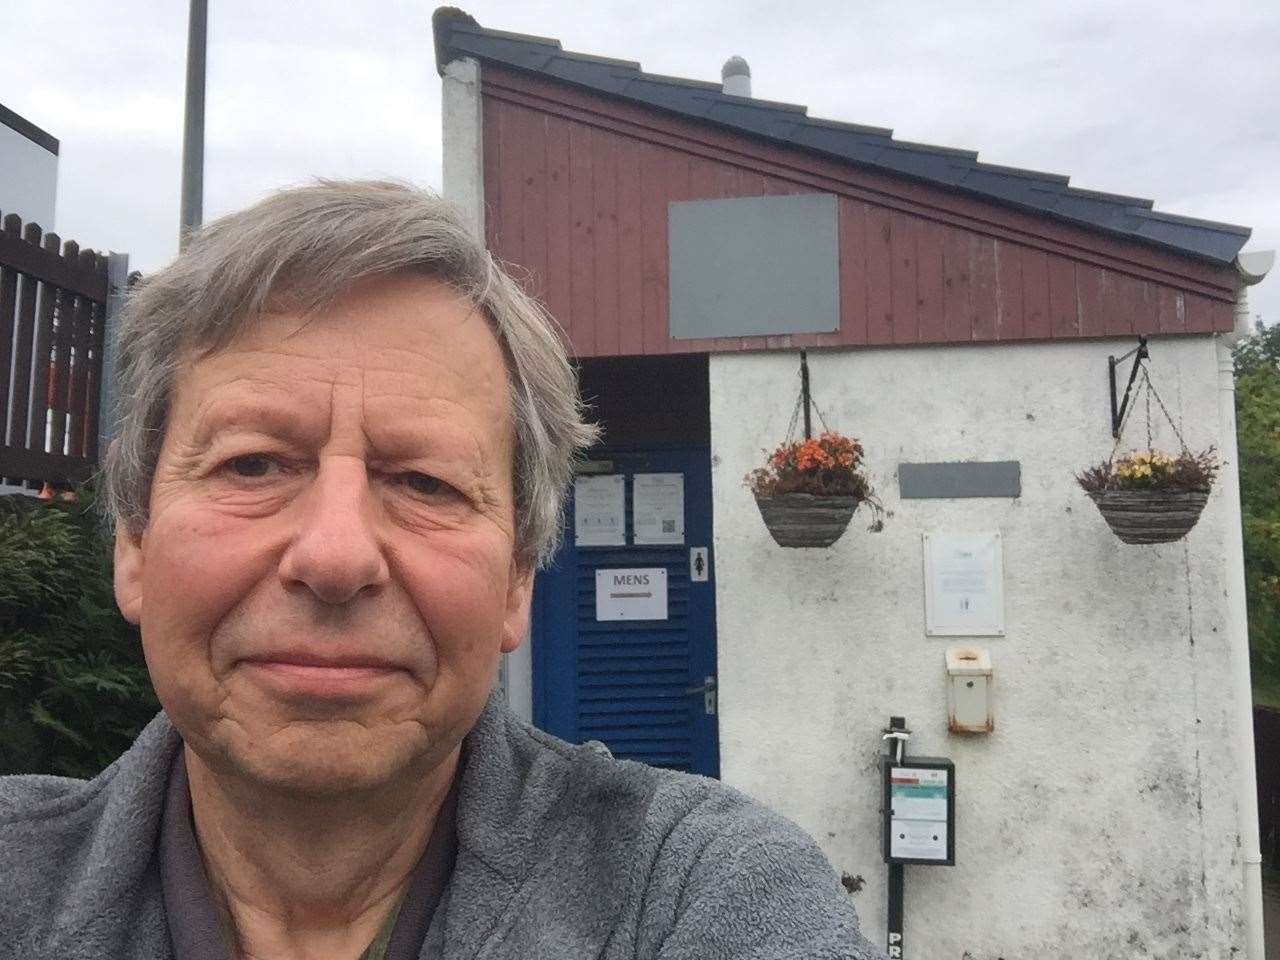 John Wood, campaigner for provision of public toilets in remoter areas, outside facilities at his home village of Poolewe